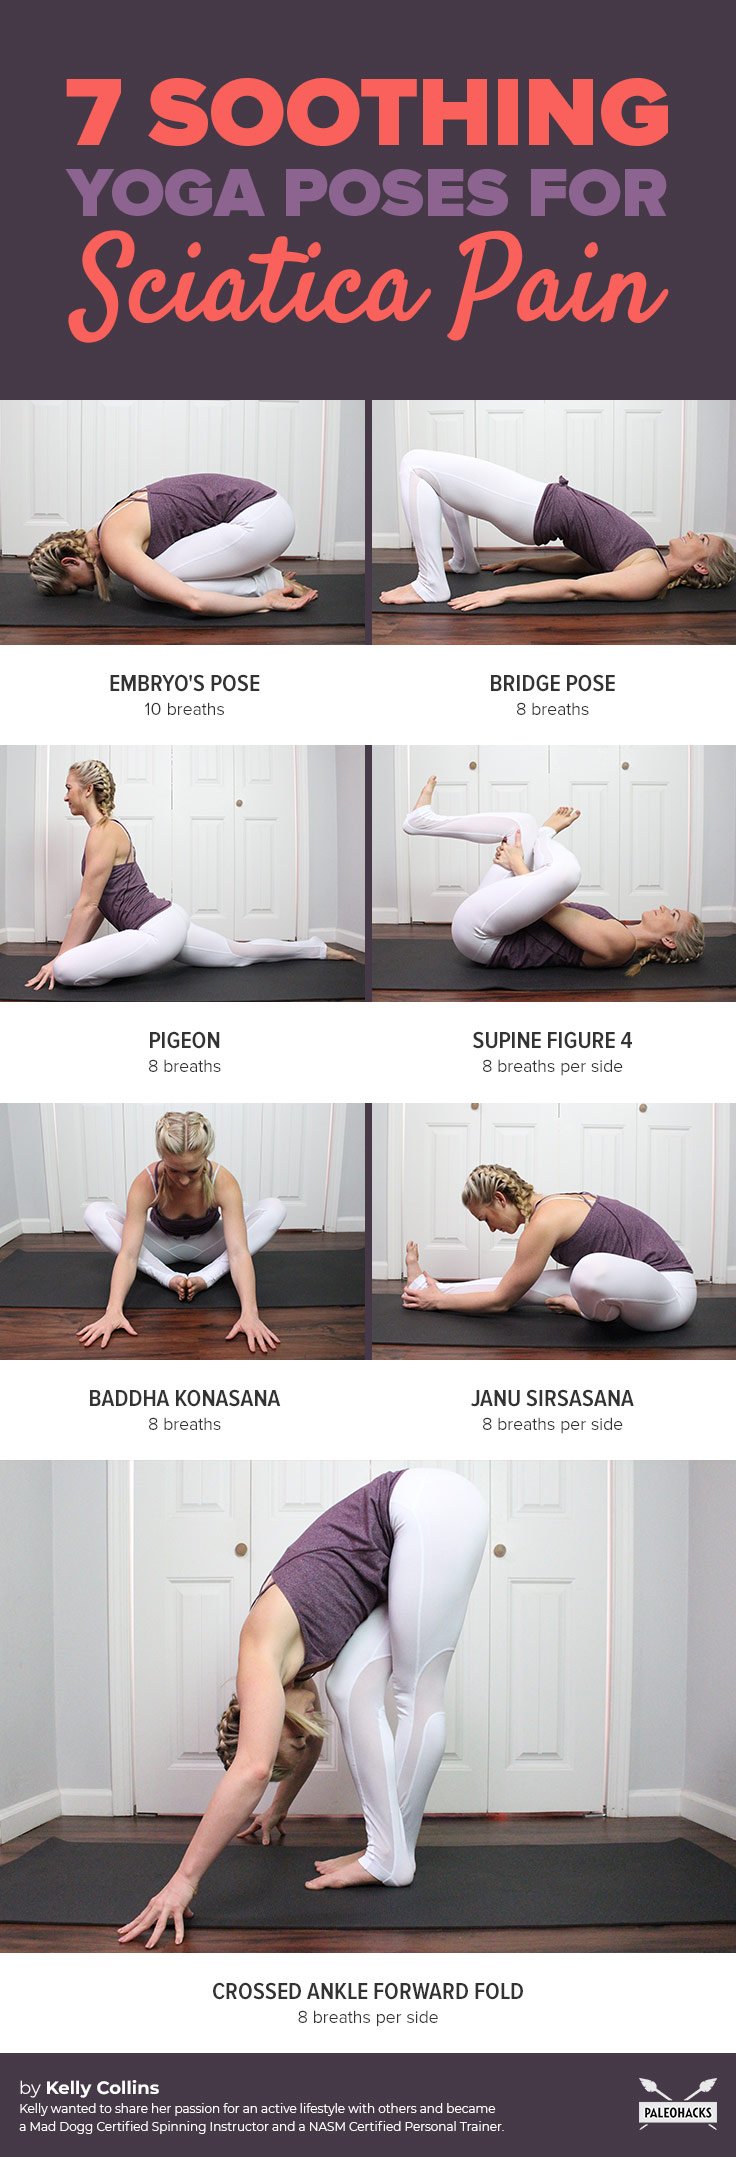 If you suffer from a radiating pain in your lower back and down through your leg, you may have sciatica. Here are seven easy, soothing yoga poses for sciatica pain relief.